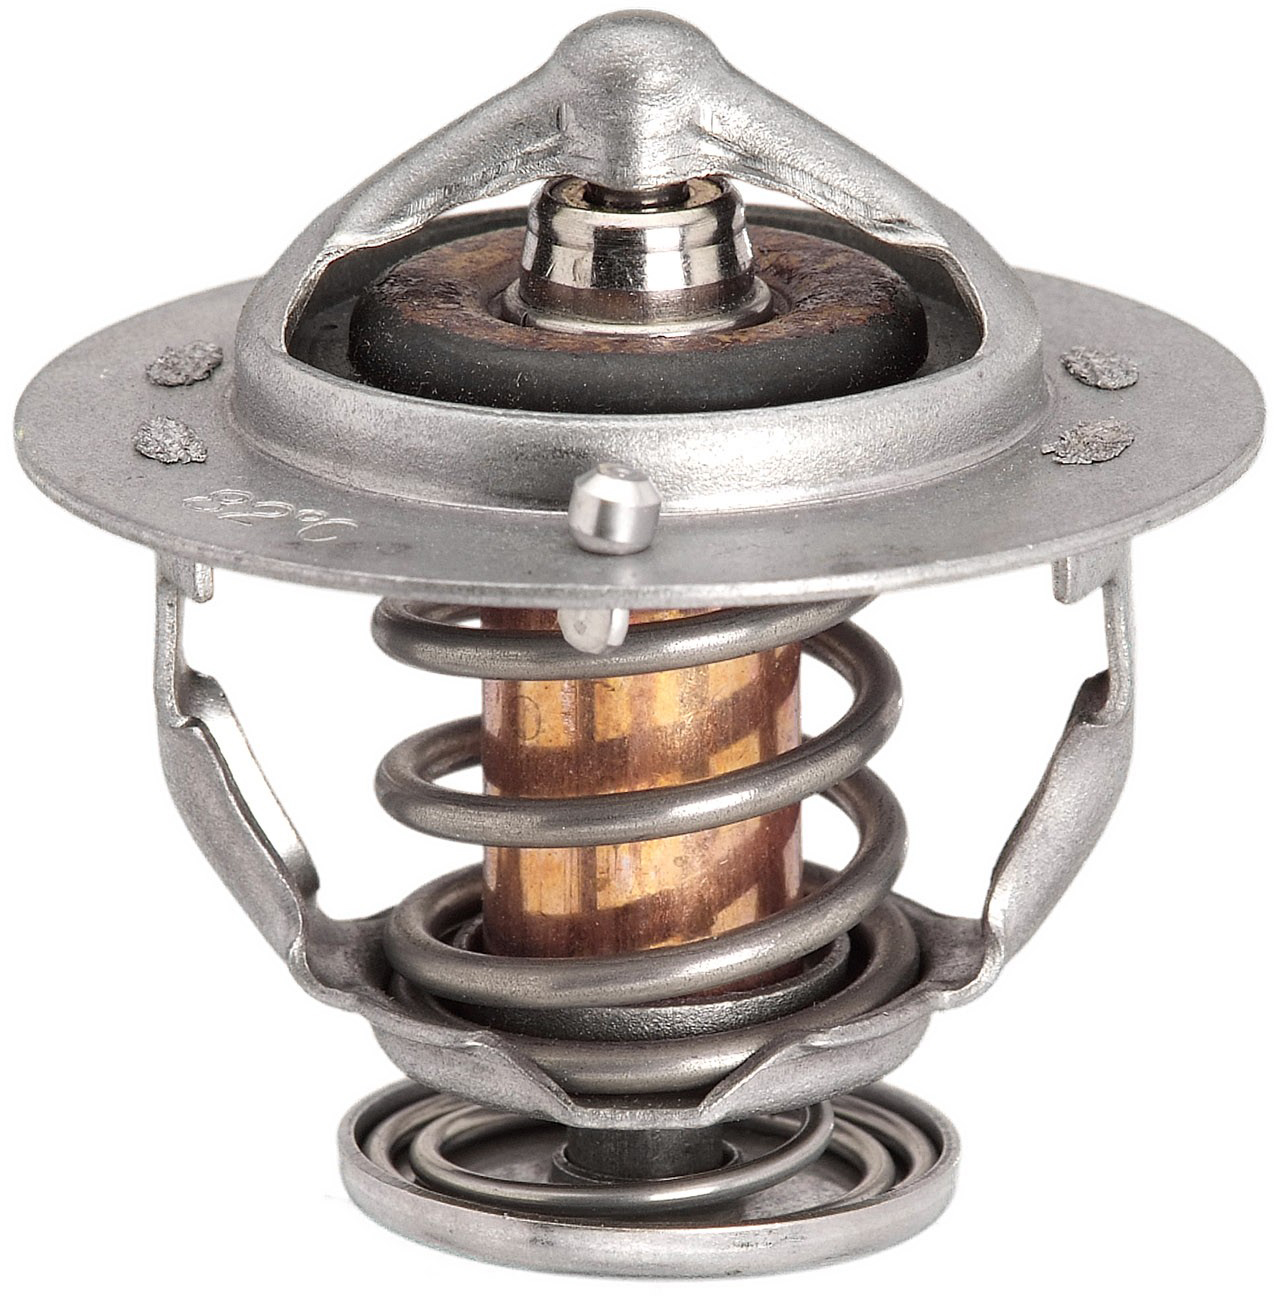 Stant 48588 OE Equivalent Thermostat 180 Degrees Fahrenheit Opening Temperature 